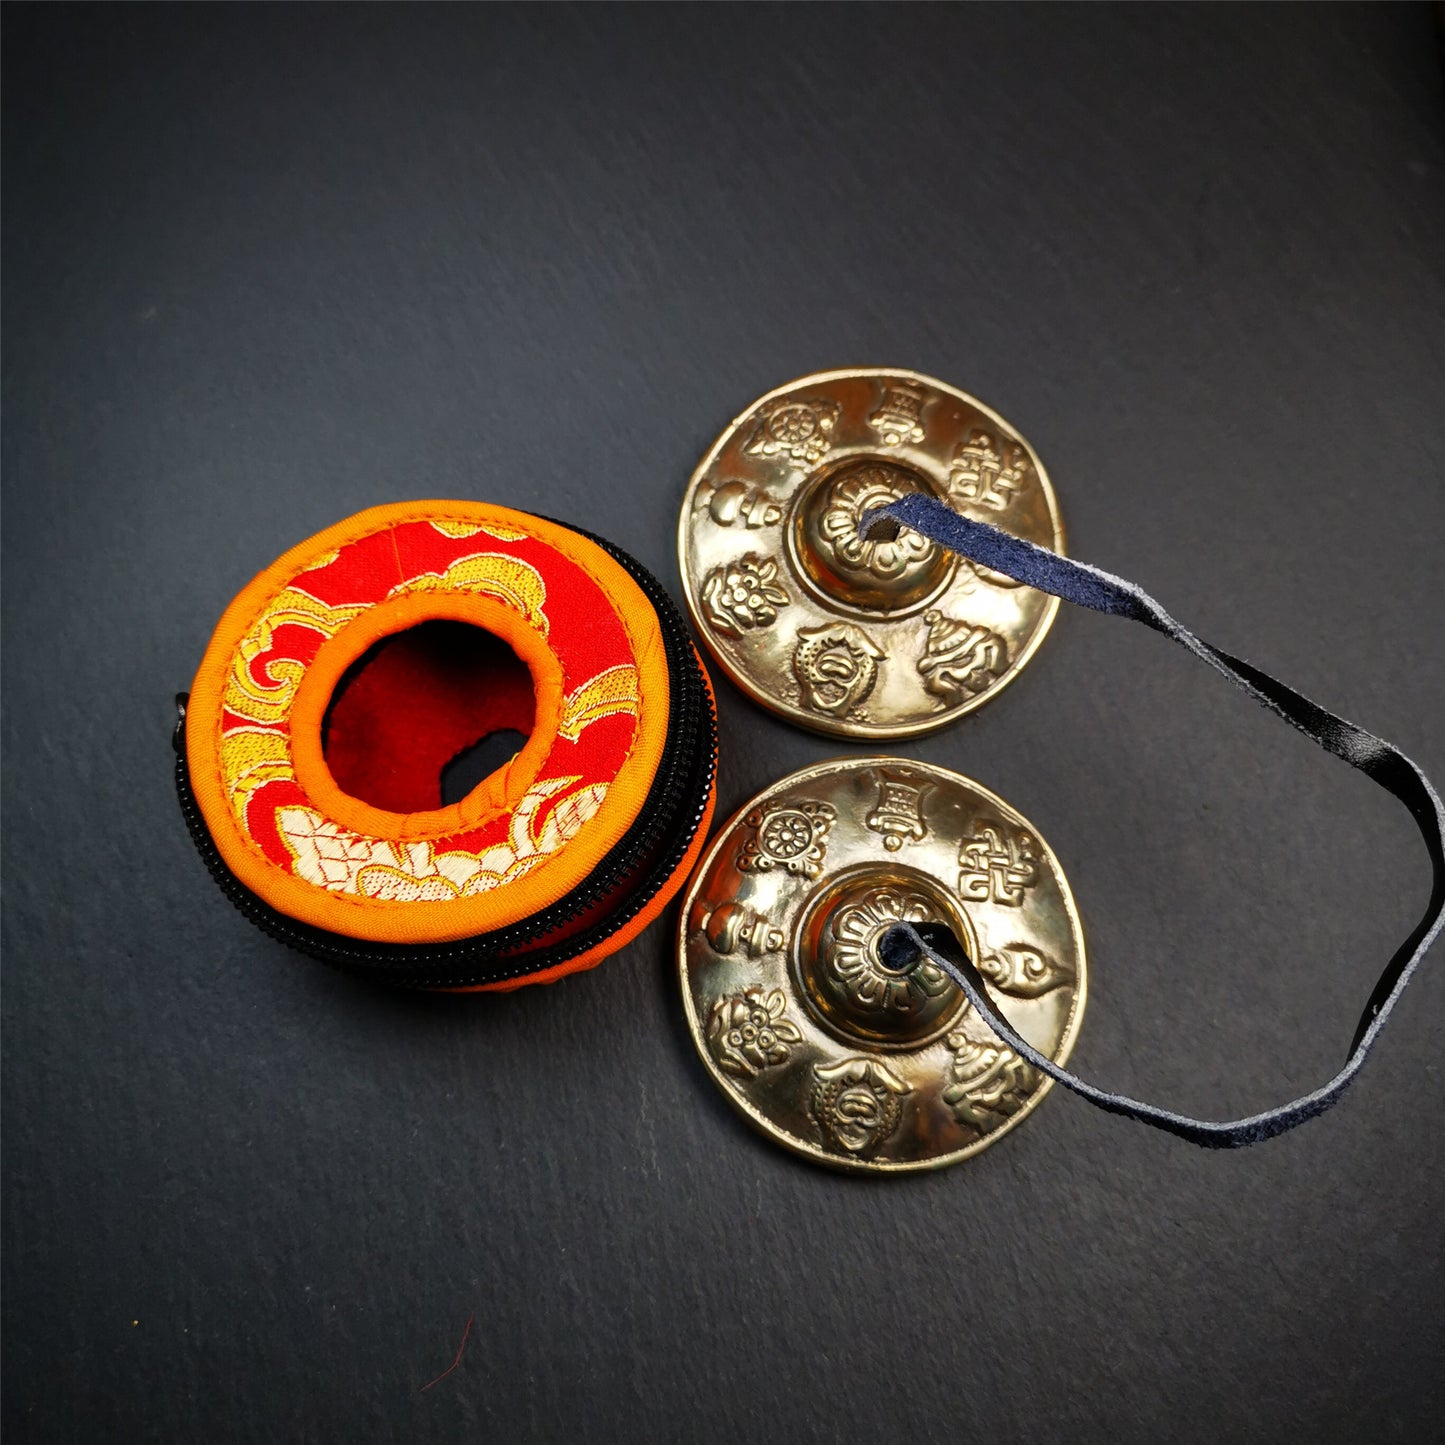 This tingsha bell set was handmade in Nepal,using traditional techniques and materials. It was made of bronze,carved astamangal pattern,6.8cm diameter,with pure, clear and resonant,good for meditation. Come with tingsha case.